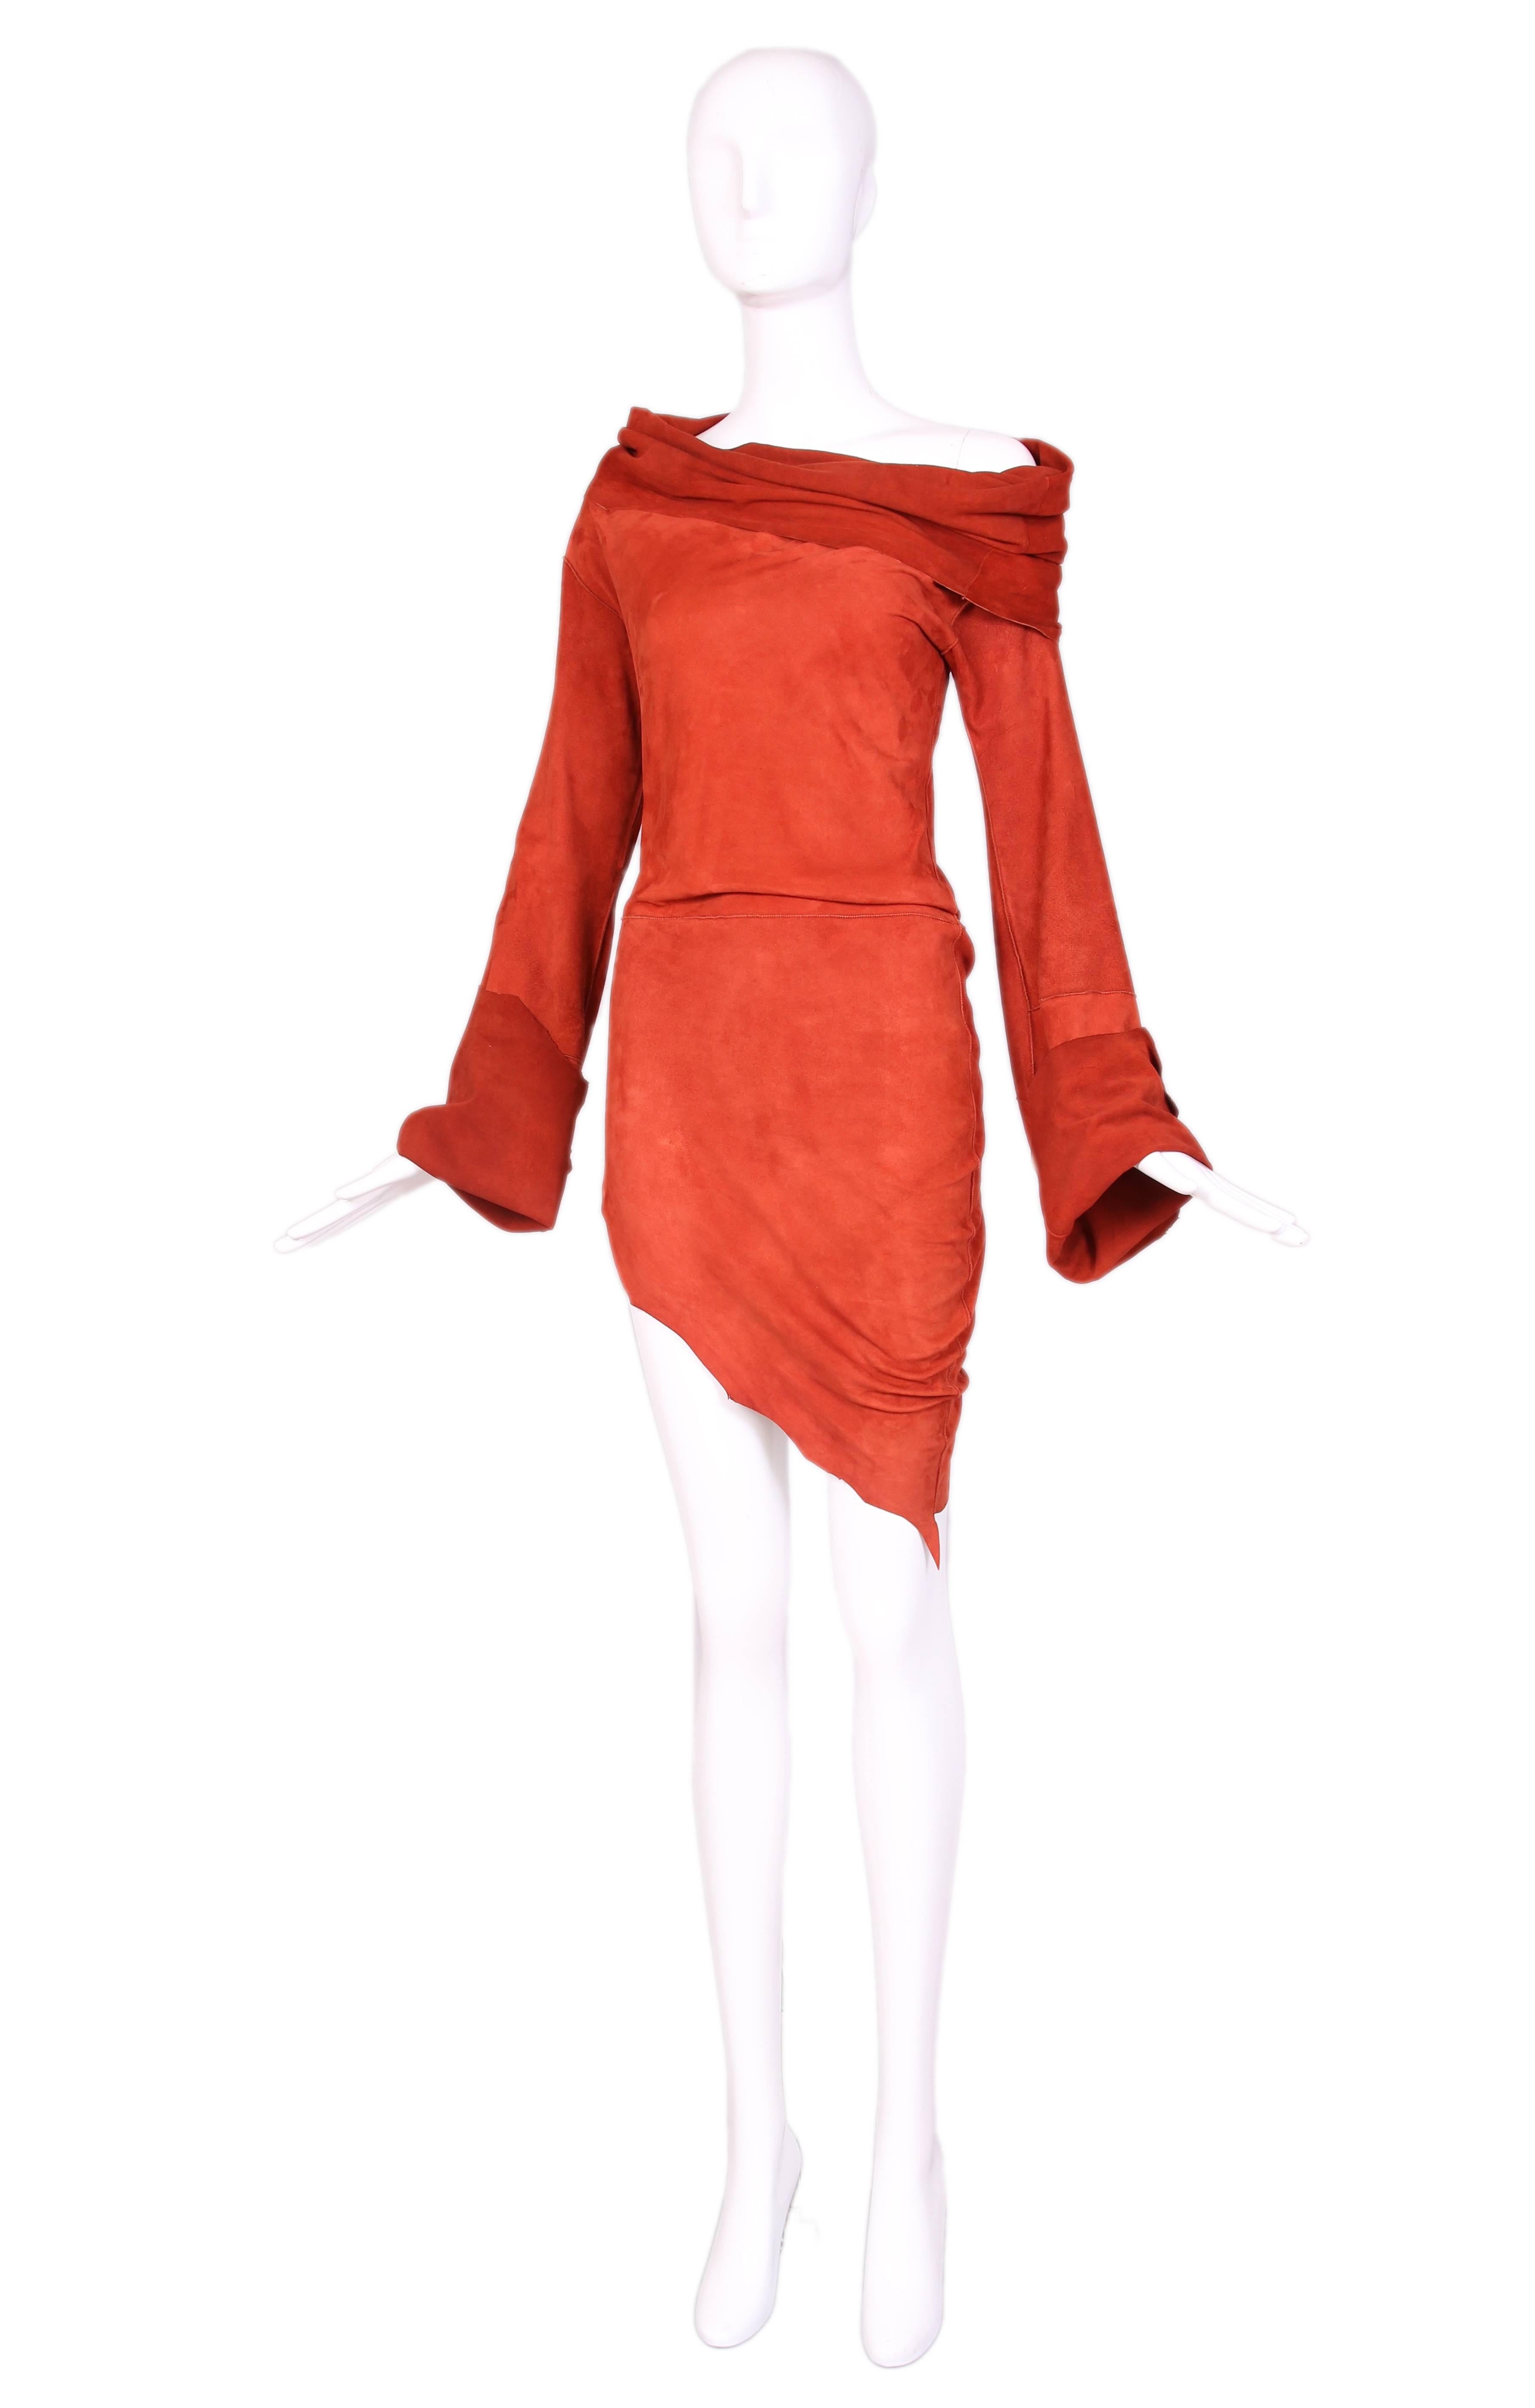 Vintage Jean Paul Gaultier burnt orange suede asymmetrical tunic with bell sleeves and over-sized cowl neck that can be worn off the shoulder. Edges of hem and cuffs are hand cut to look uneven. In excellent condition with some minor light, hard to